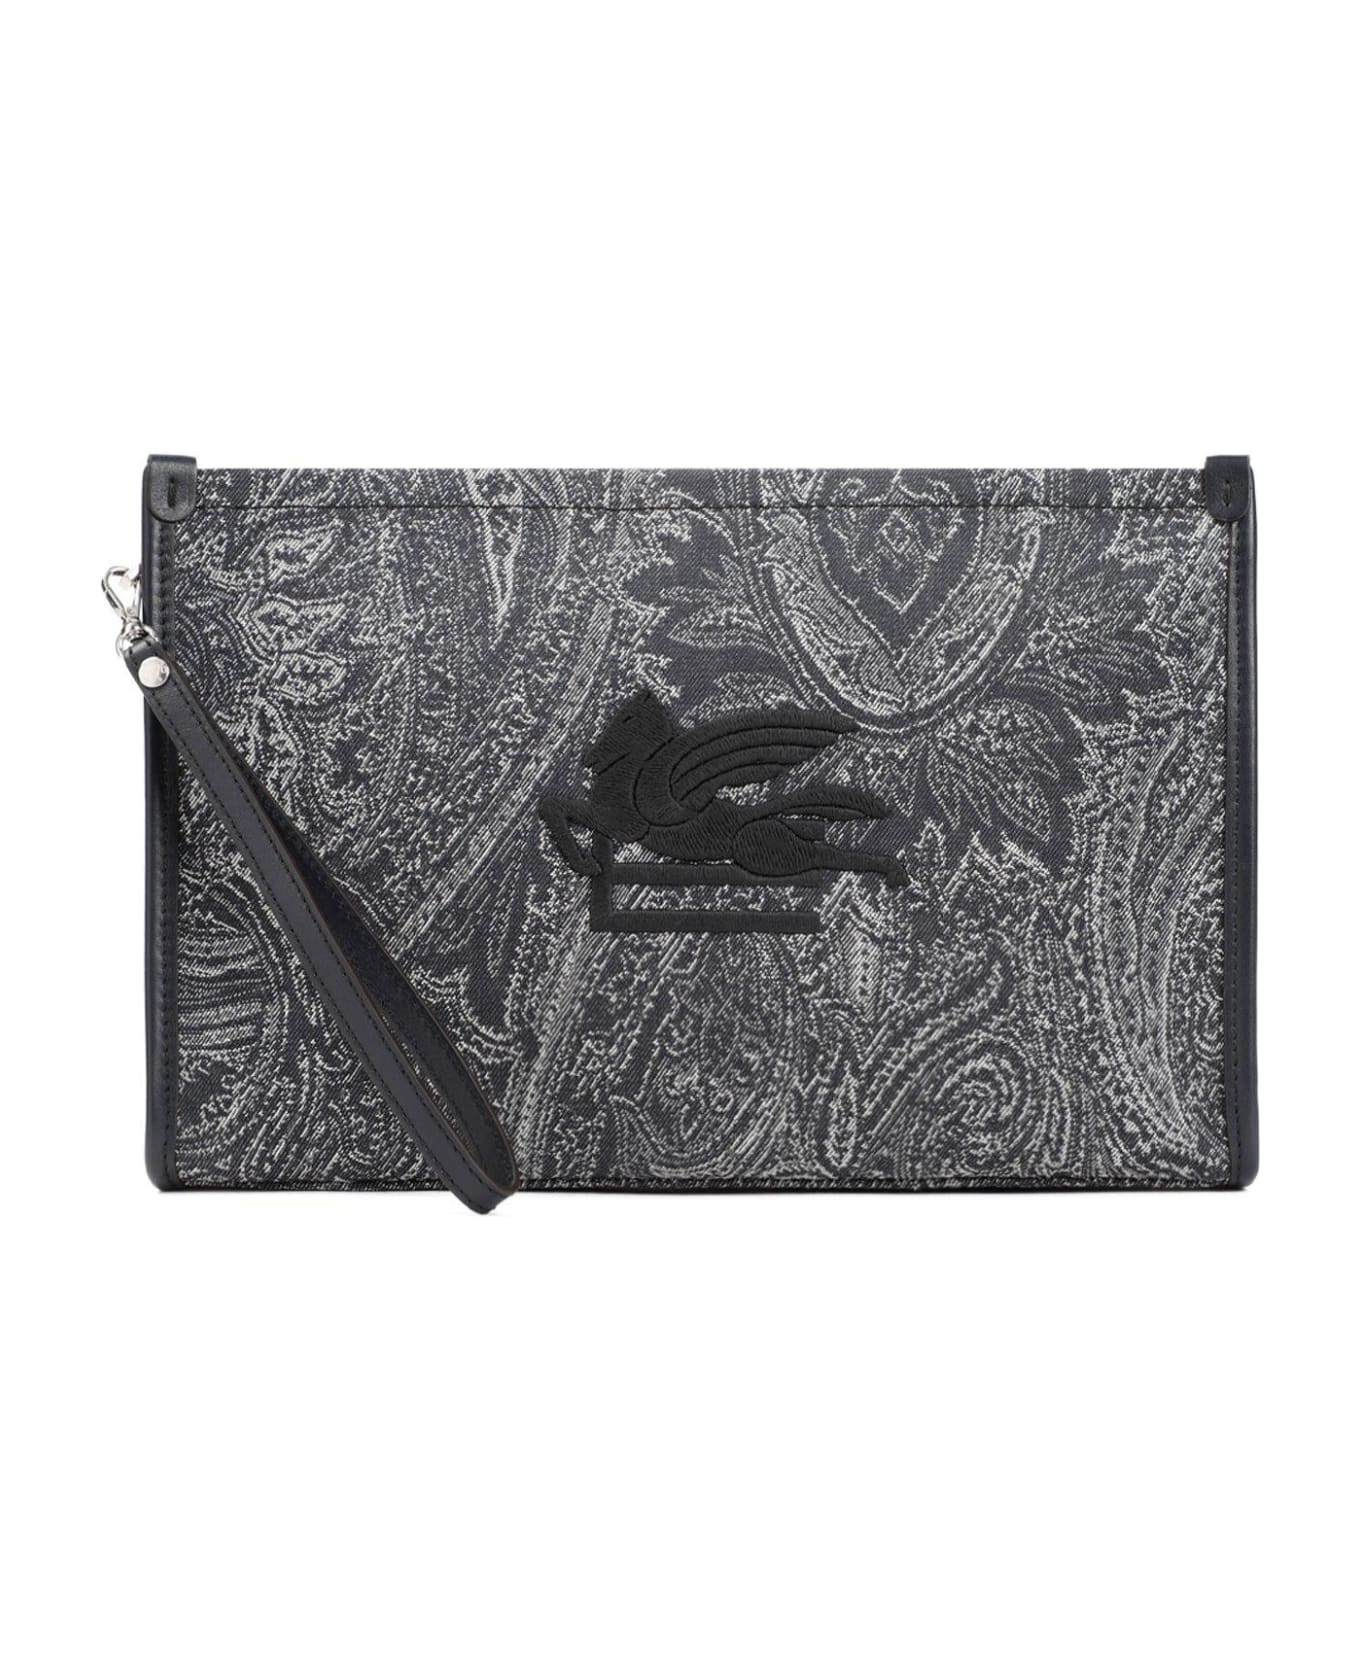 Etro Navy Blue Large Pouch With Paisley Jacquard Motif - Blue